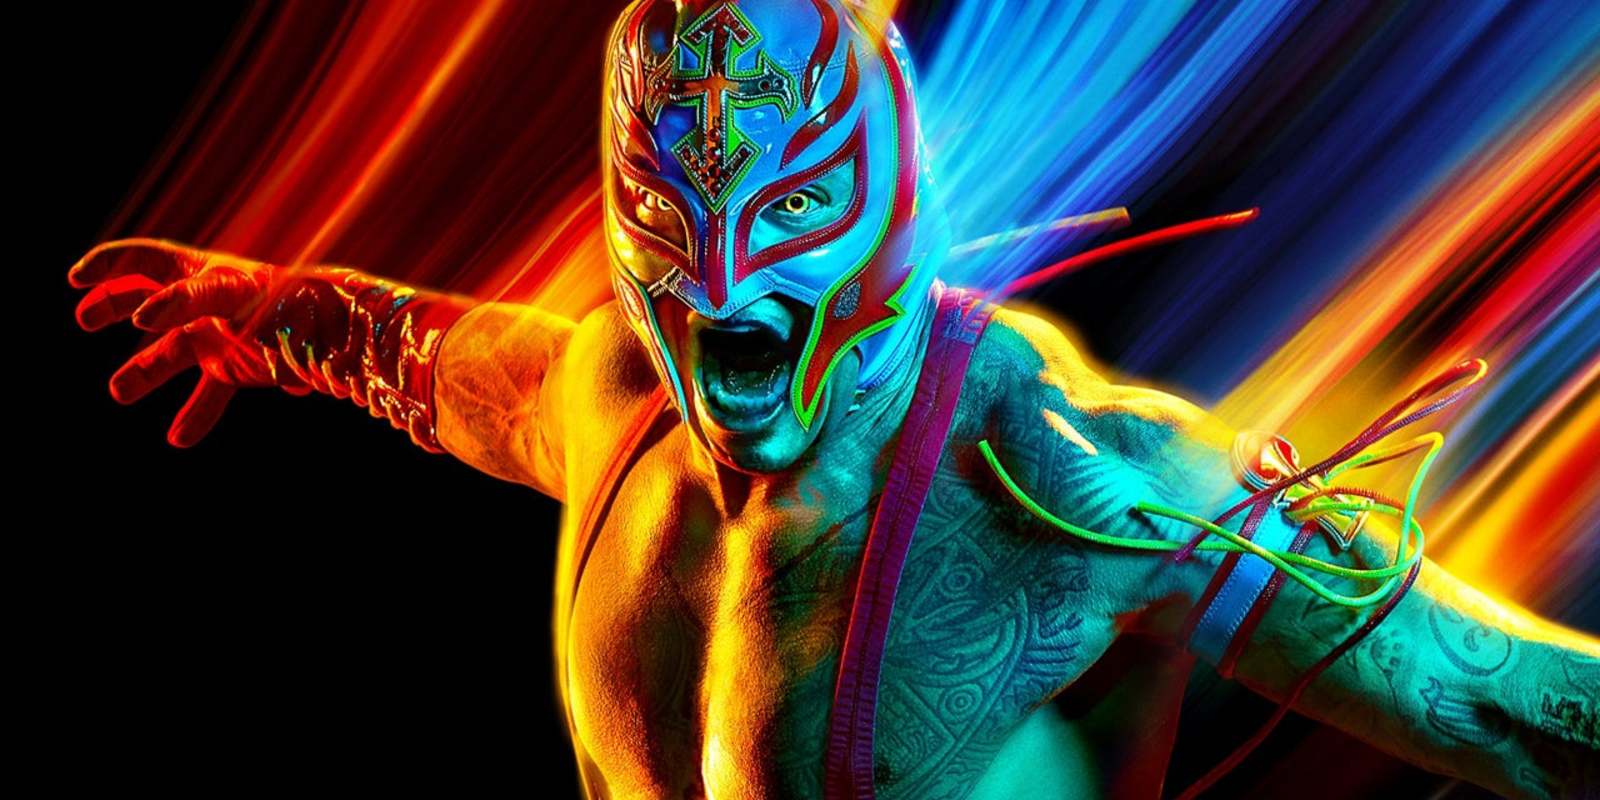 Wwe Returns With 2k22 In March And Rey Mysterio Is On The